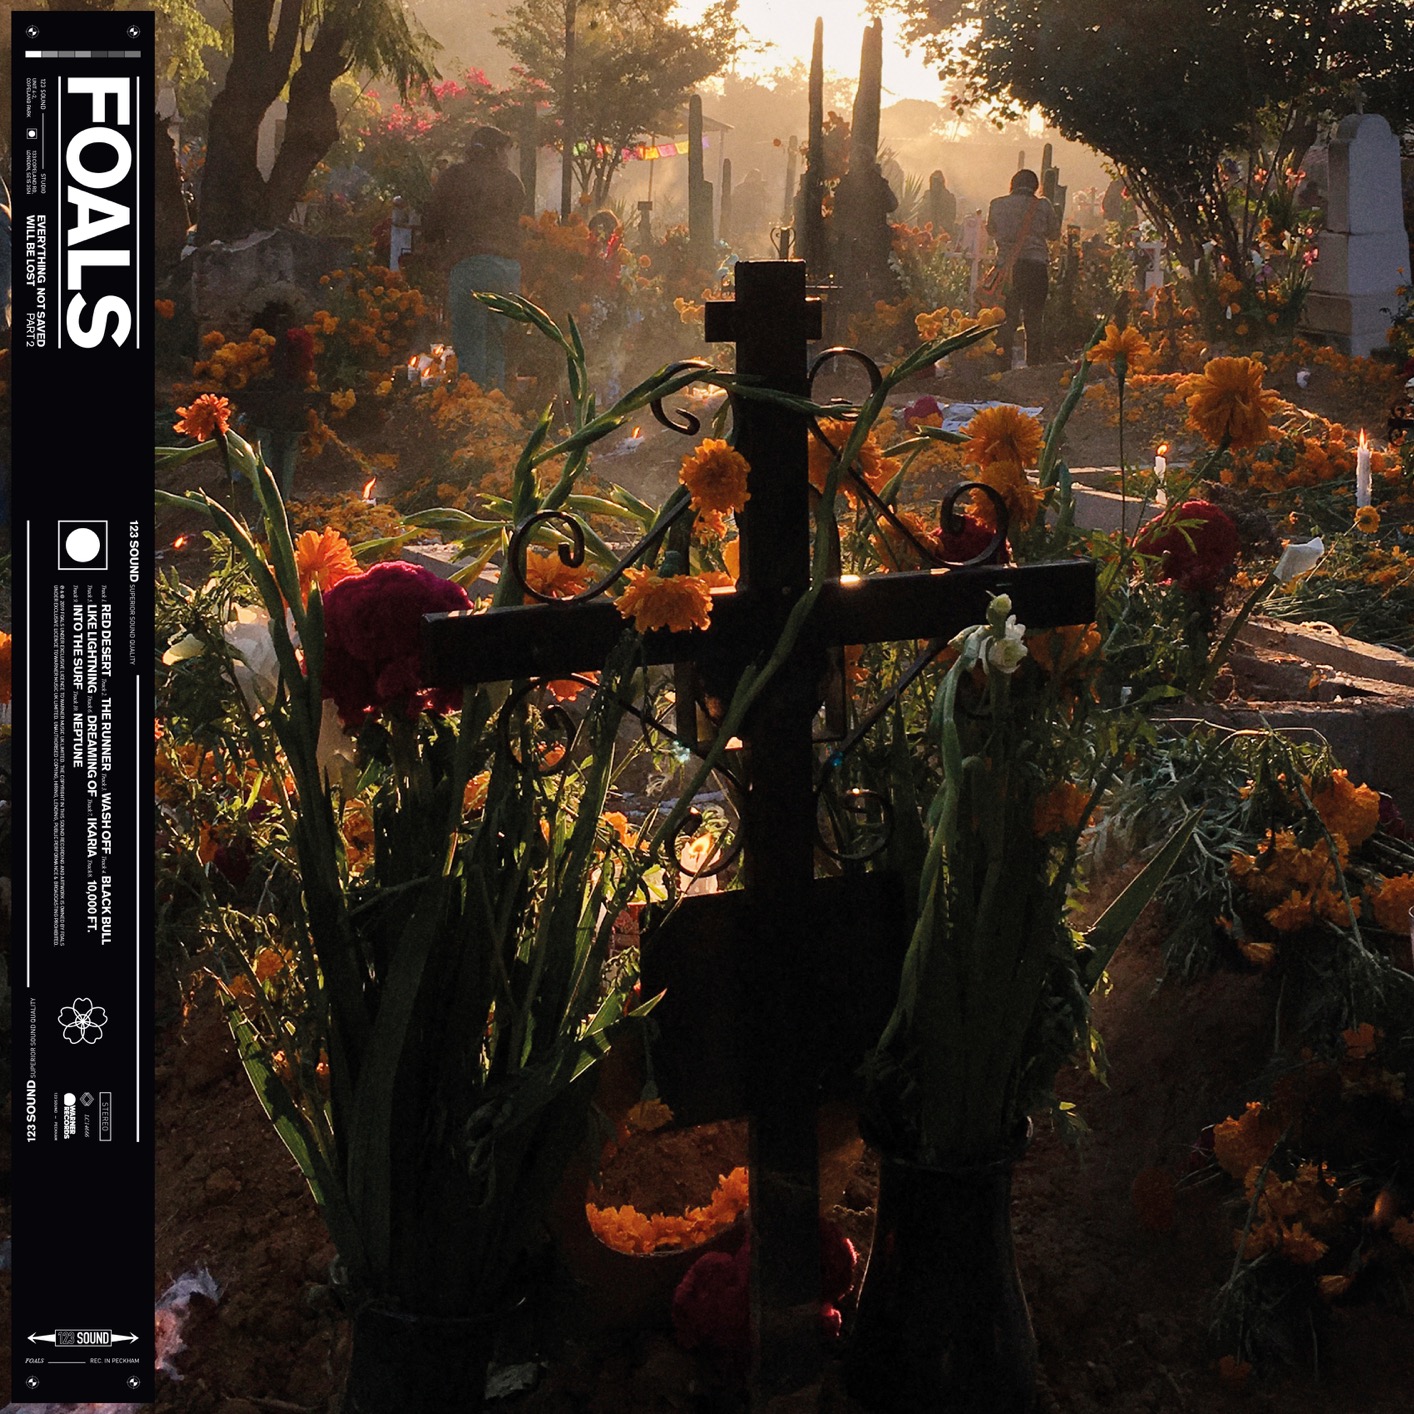 Foals - Everything Not Saved Will Be Lost Part 2 (2019) [FLAC 24bit/44,1kHz]